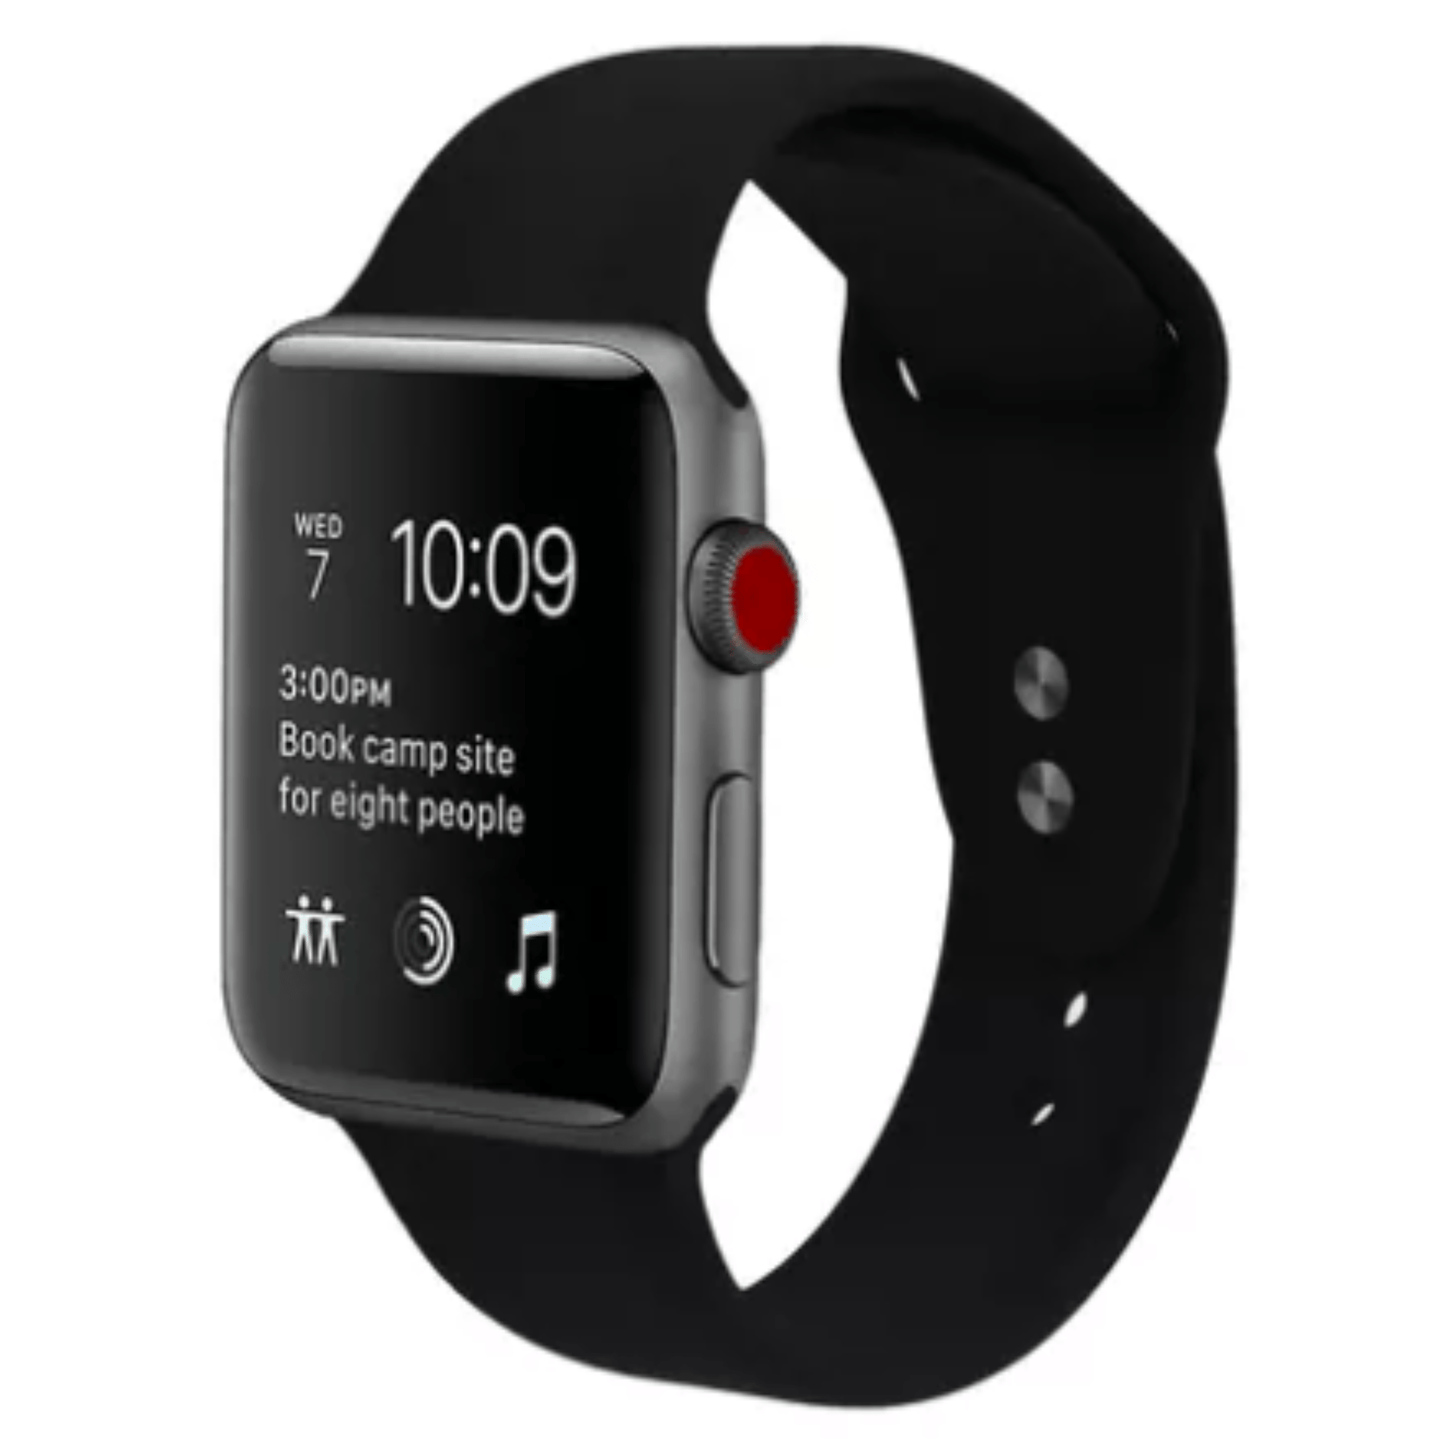 Silicone Sport Replacement Band for Apple Watch Black Apple Watch Band Elements Watches